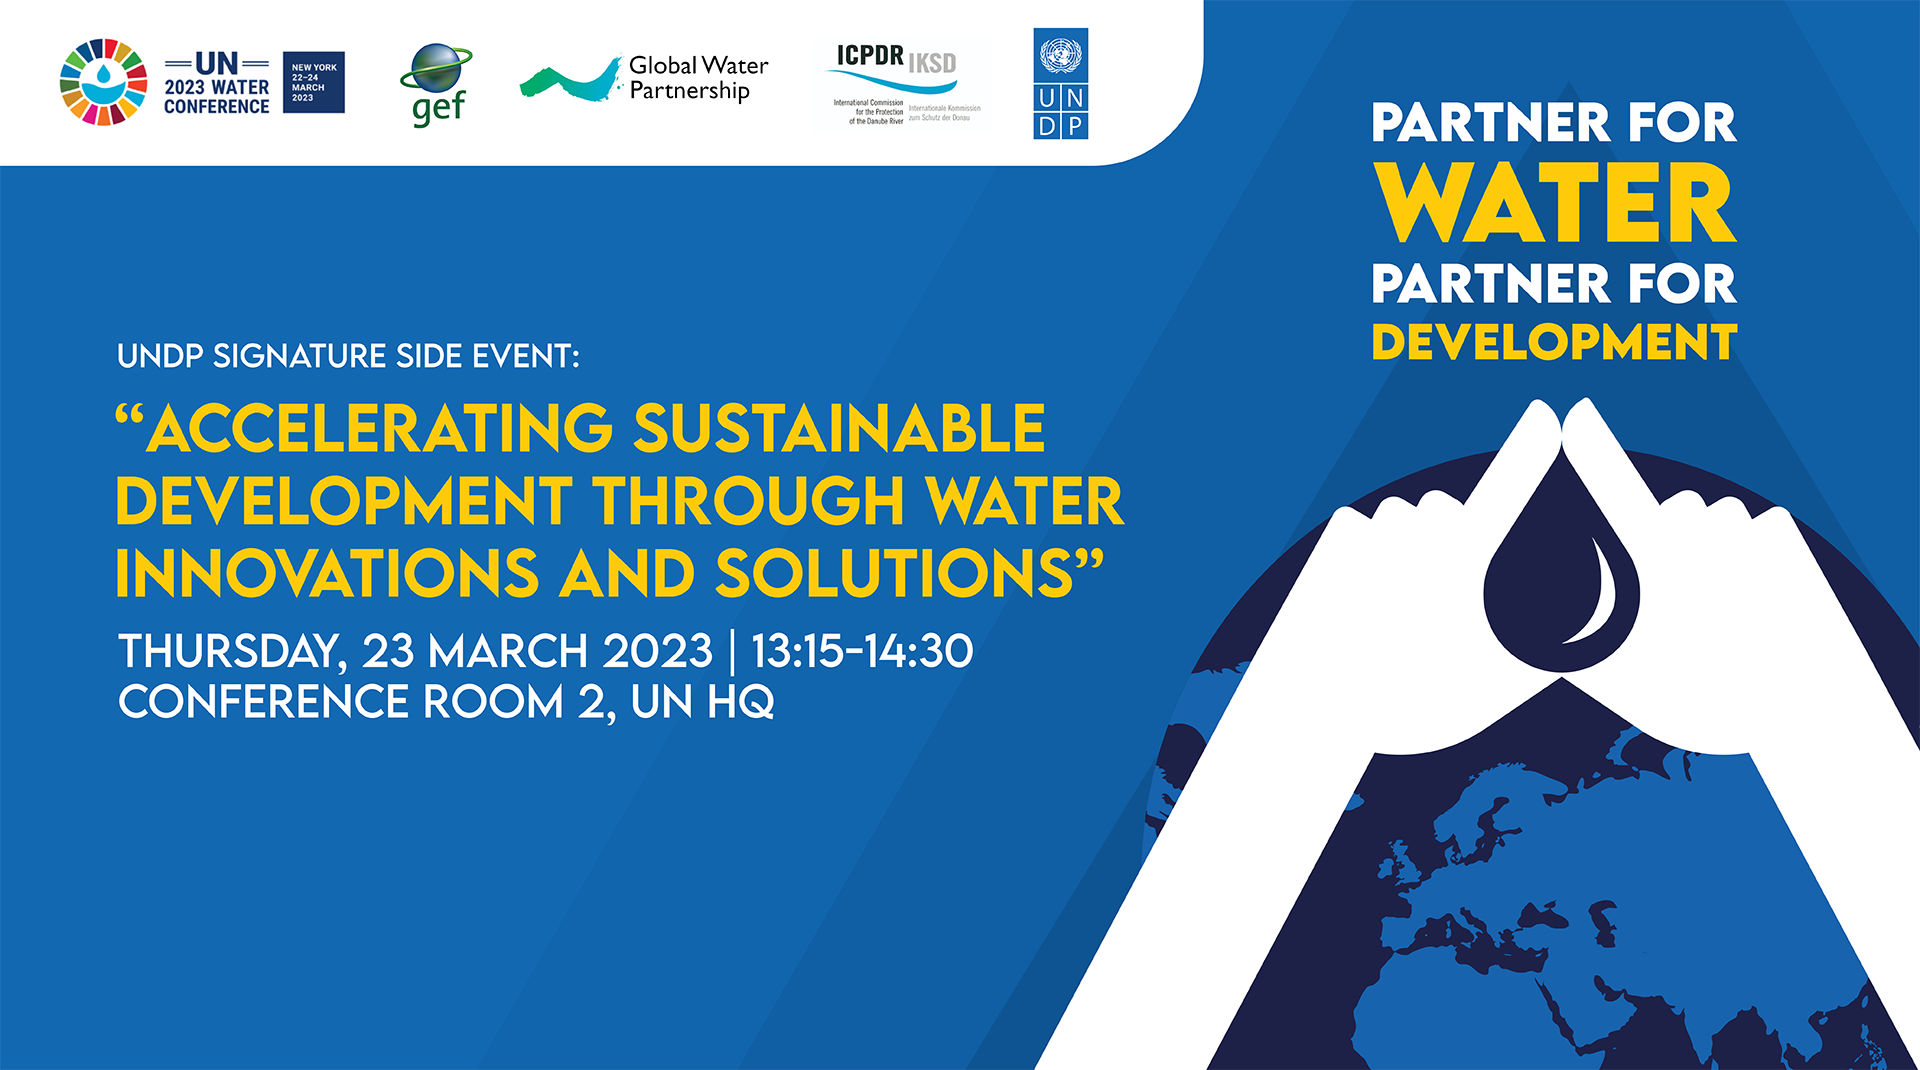 UN 2023 Water Conference United Nations Development Programme